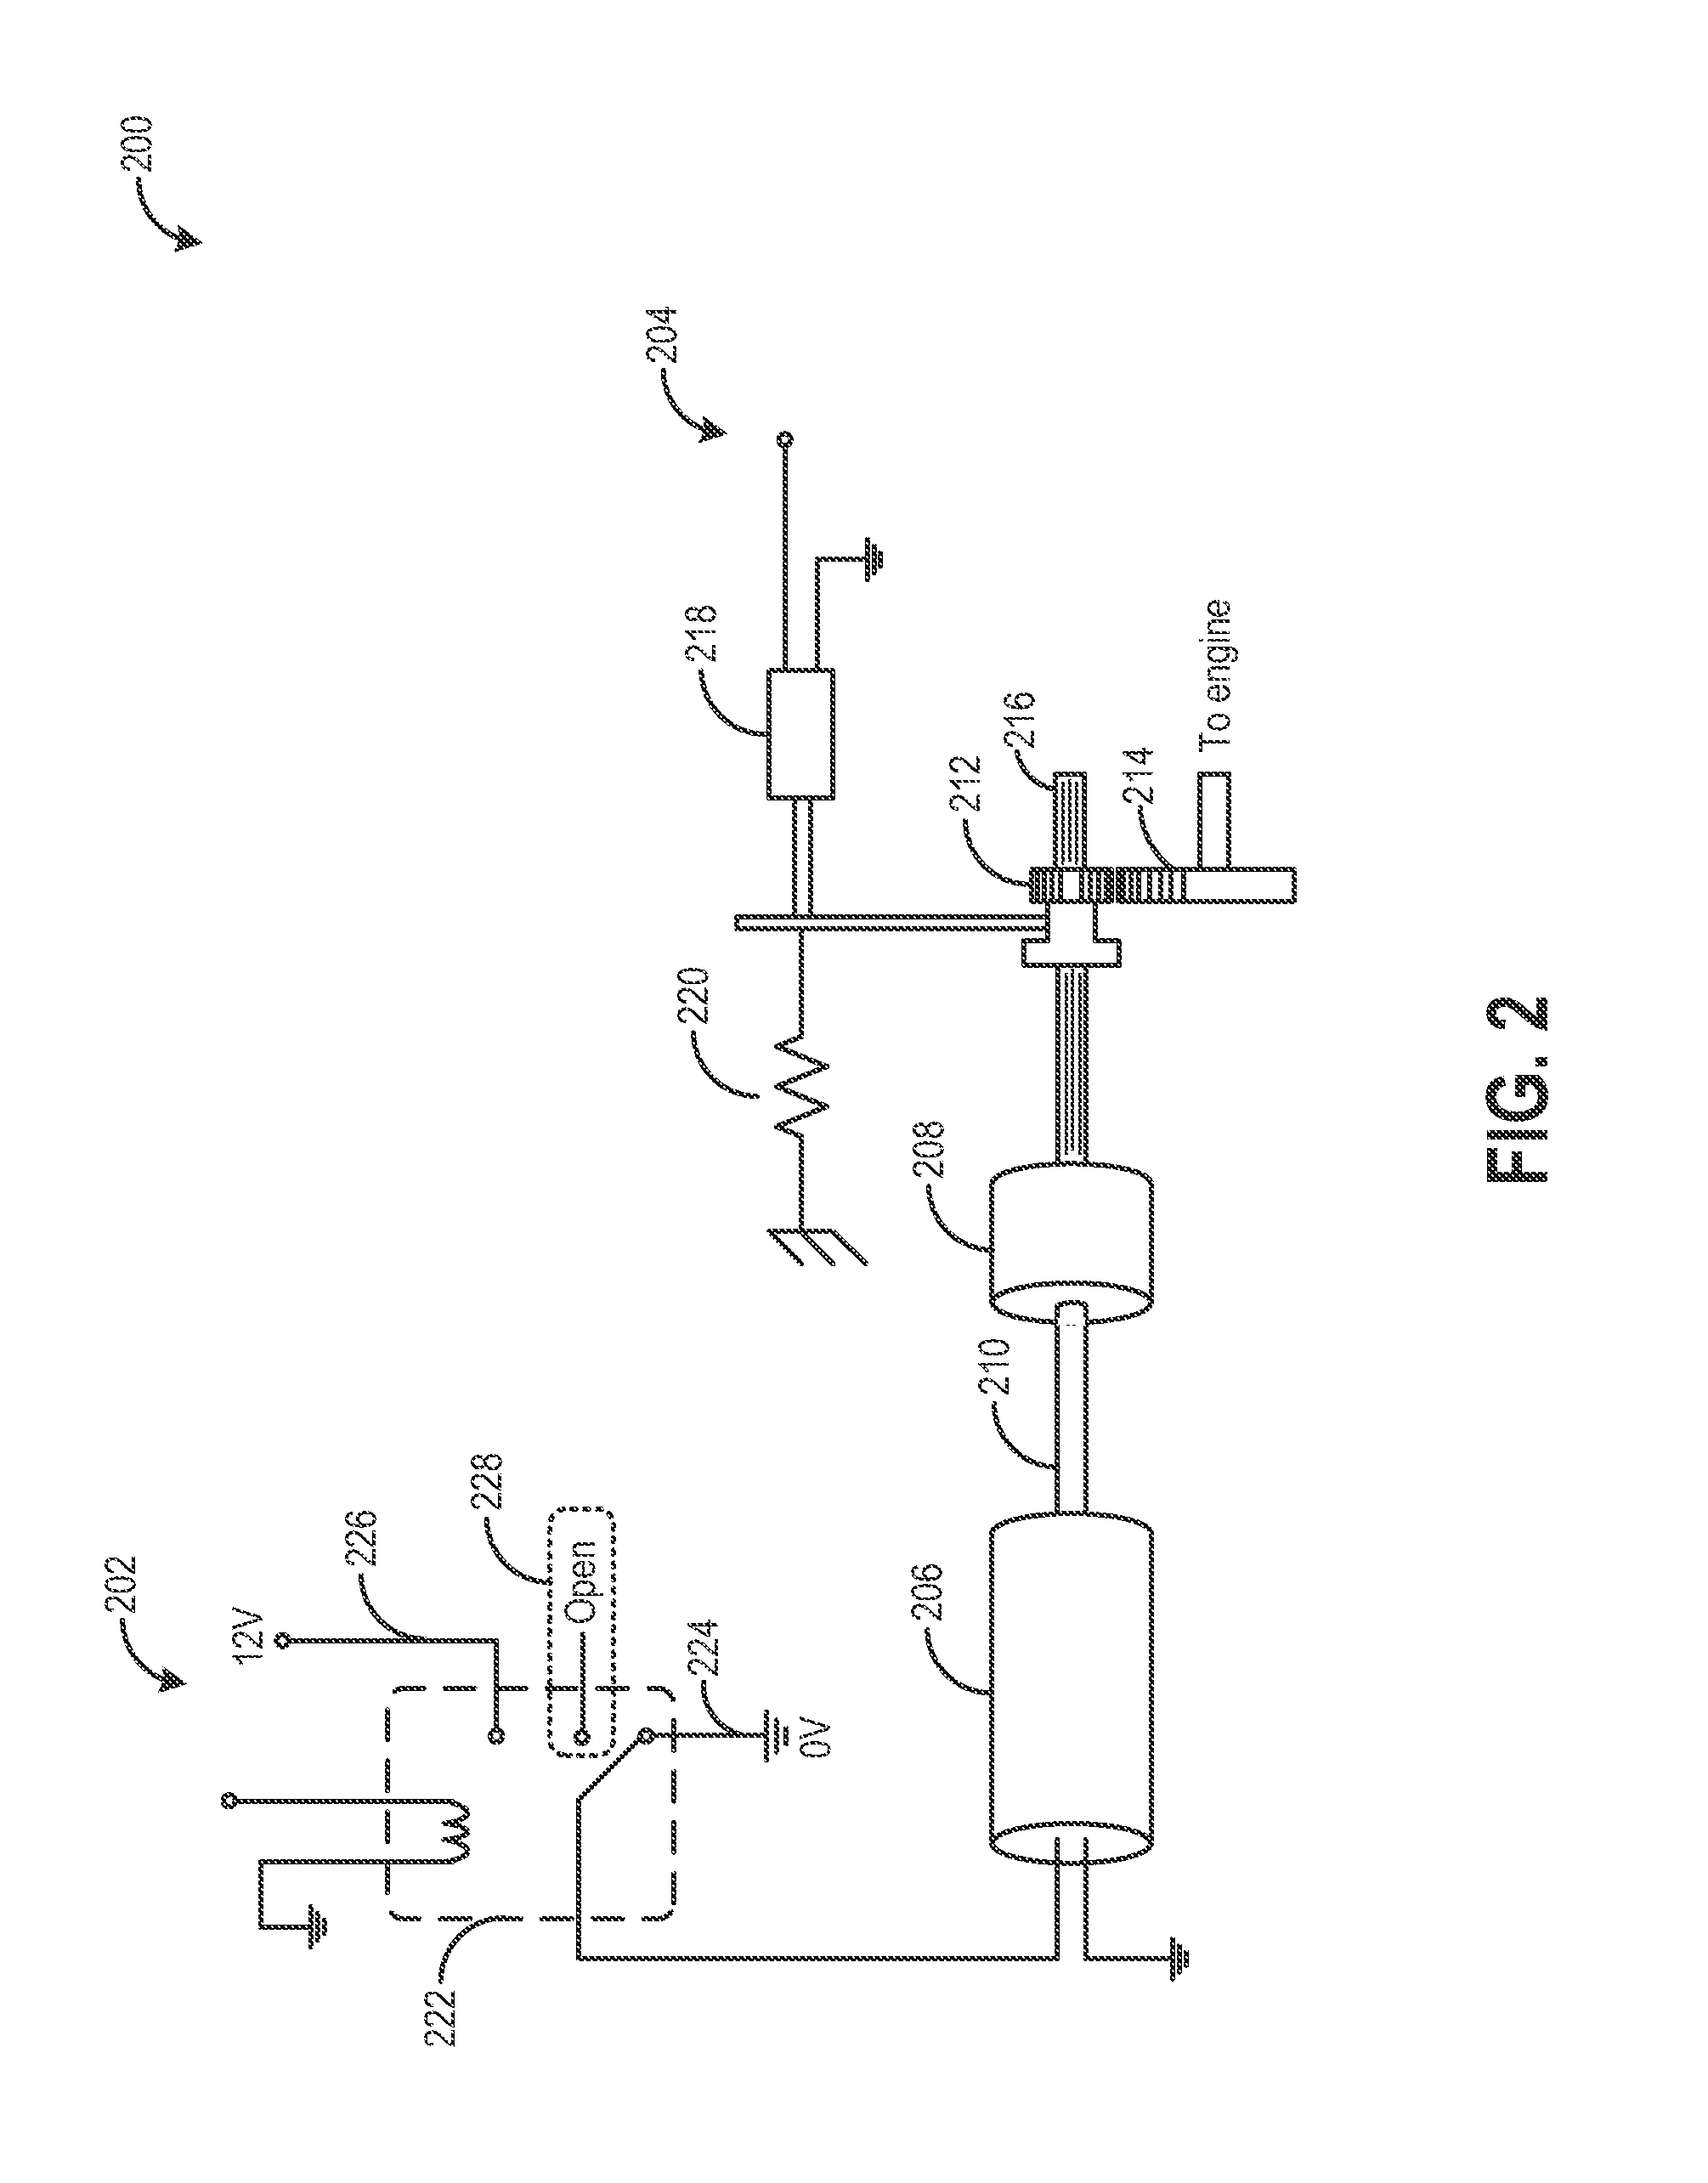 Methods and systems for assisted direct start control